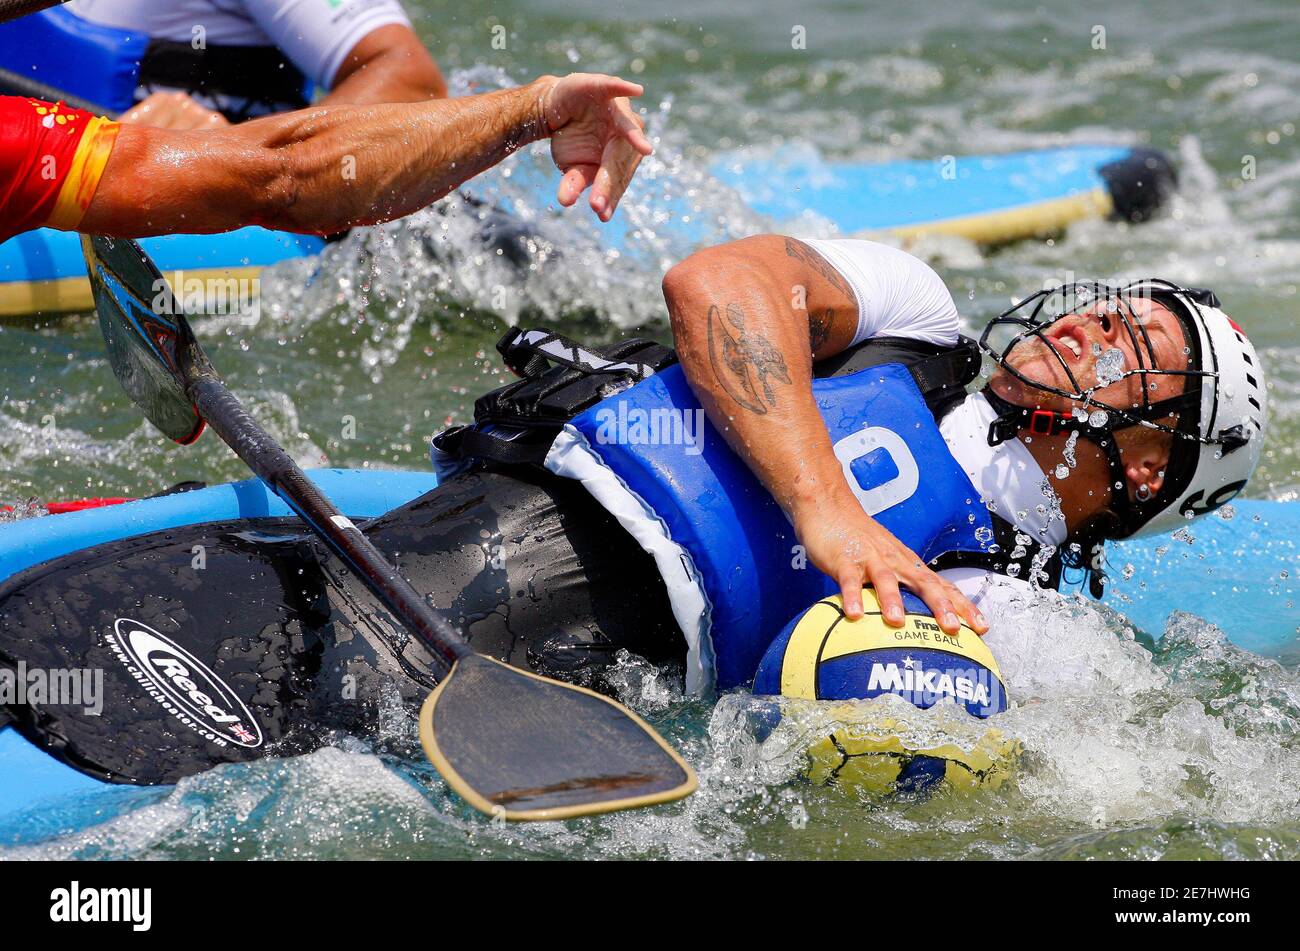 Italy's Bellini Luca fights for the ball against Spain during their men's canoe  polo qualifying match at the 2009 World Games in Kaohsiung July 17, 2009.  The World Games will be held